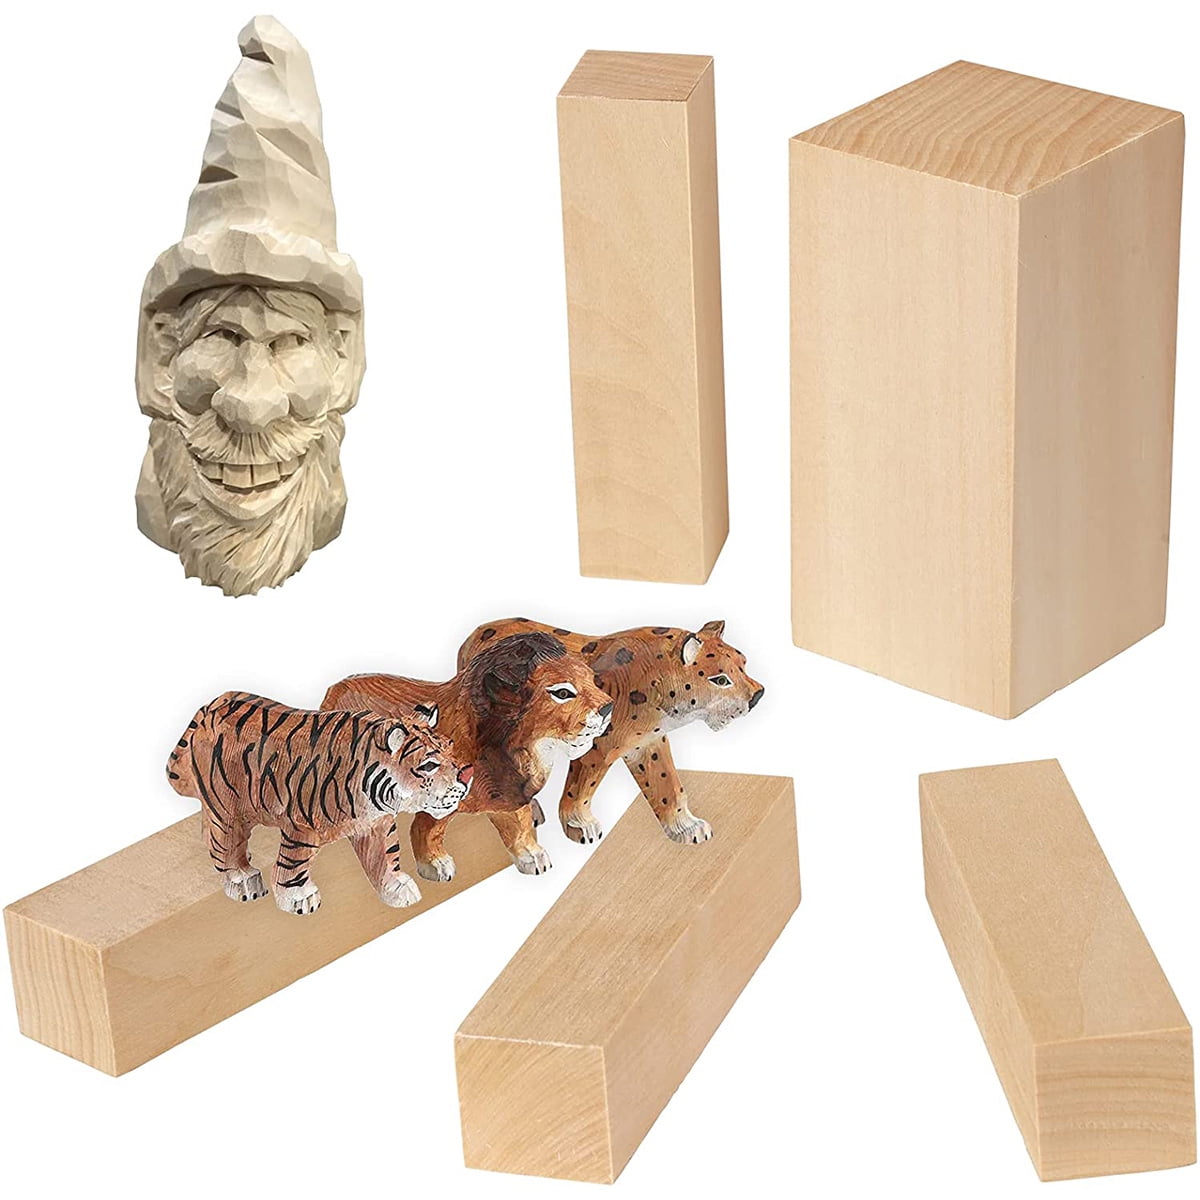 Basswood Carving Block Set of 14pcs - Craftylite - Creativity at its best